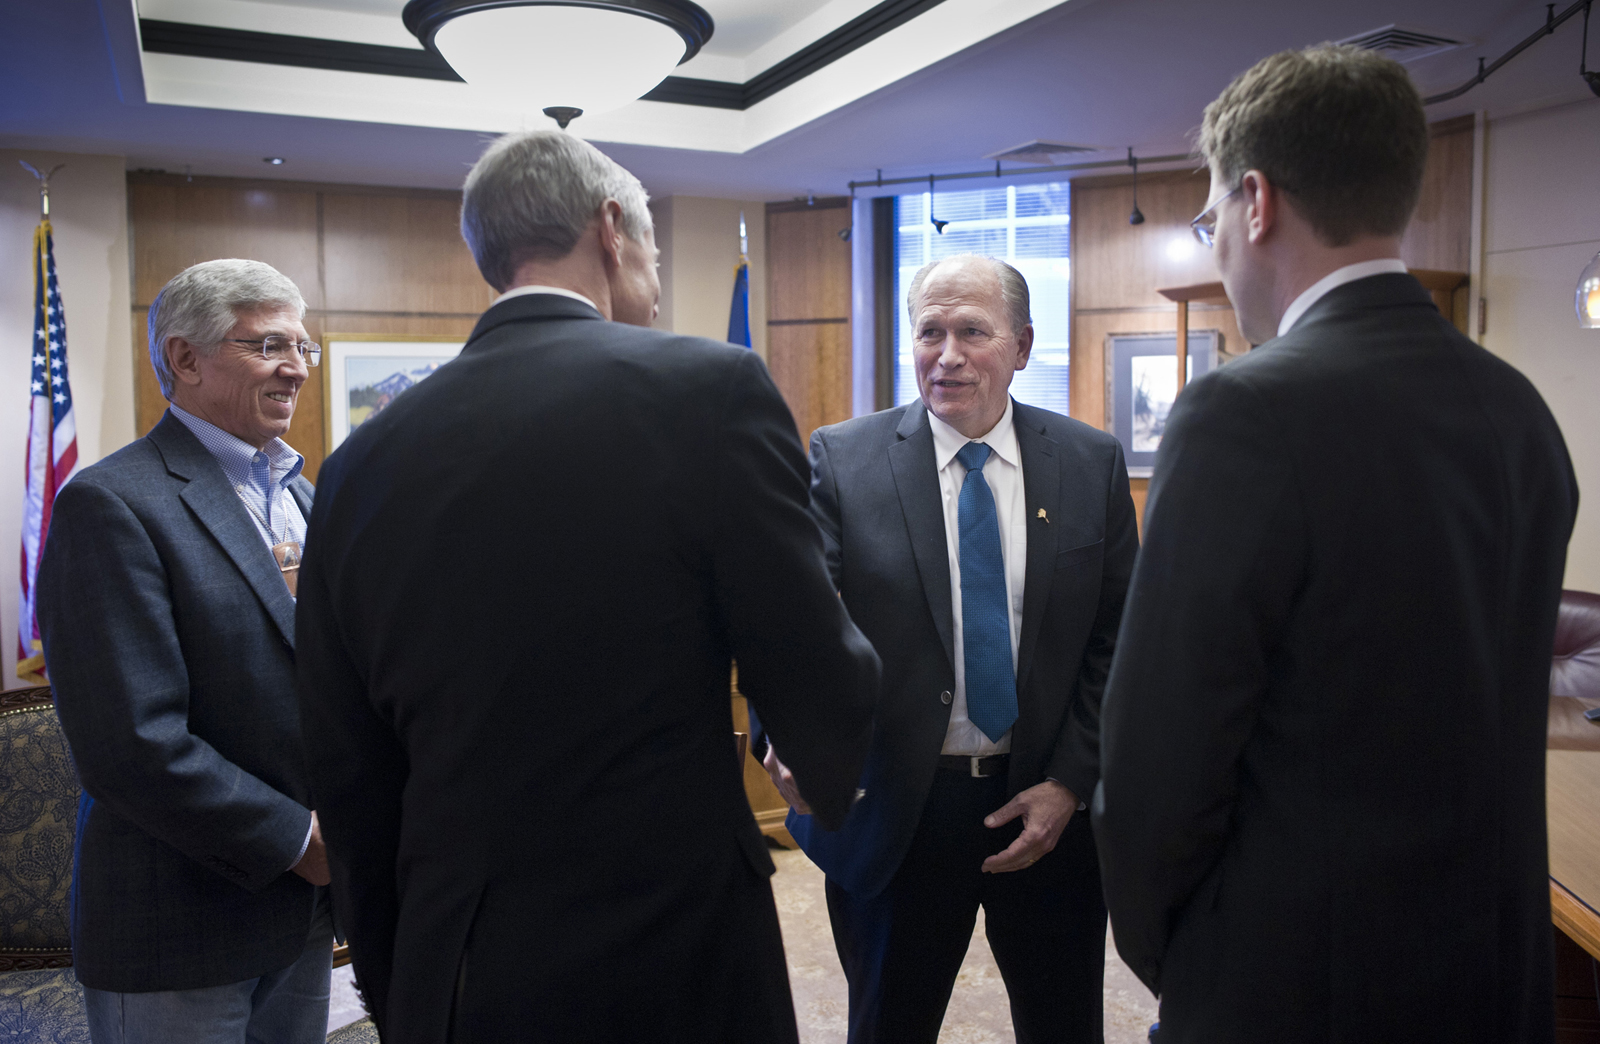 In this Jan. 19, 2016 file photo, Gov. Bill Walker and Lt. Gov. Byron Mallott, left, receive a ceremonial visit by Rep. Matt Claman, D-Anchorage, second from left, and Rep. Lance Pruitt, R-Anchorage, after the House gaveled into session on the first day of the 29th Legislature at the Capitol in Juneau.